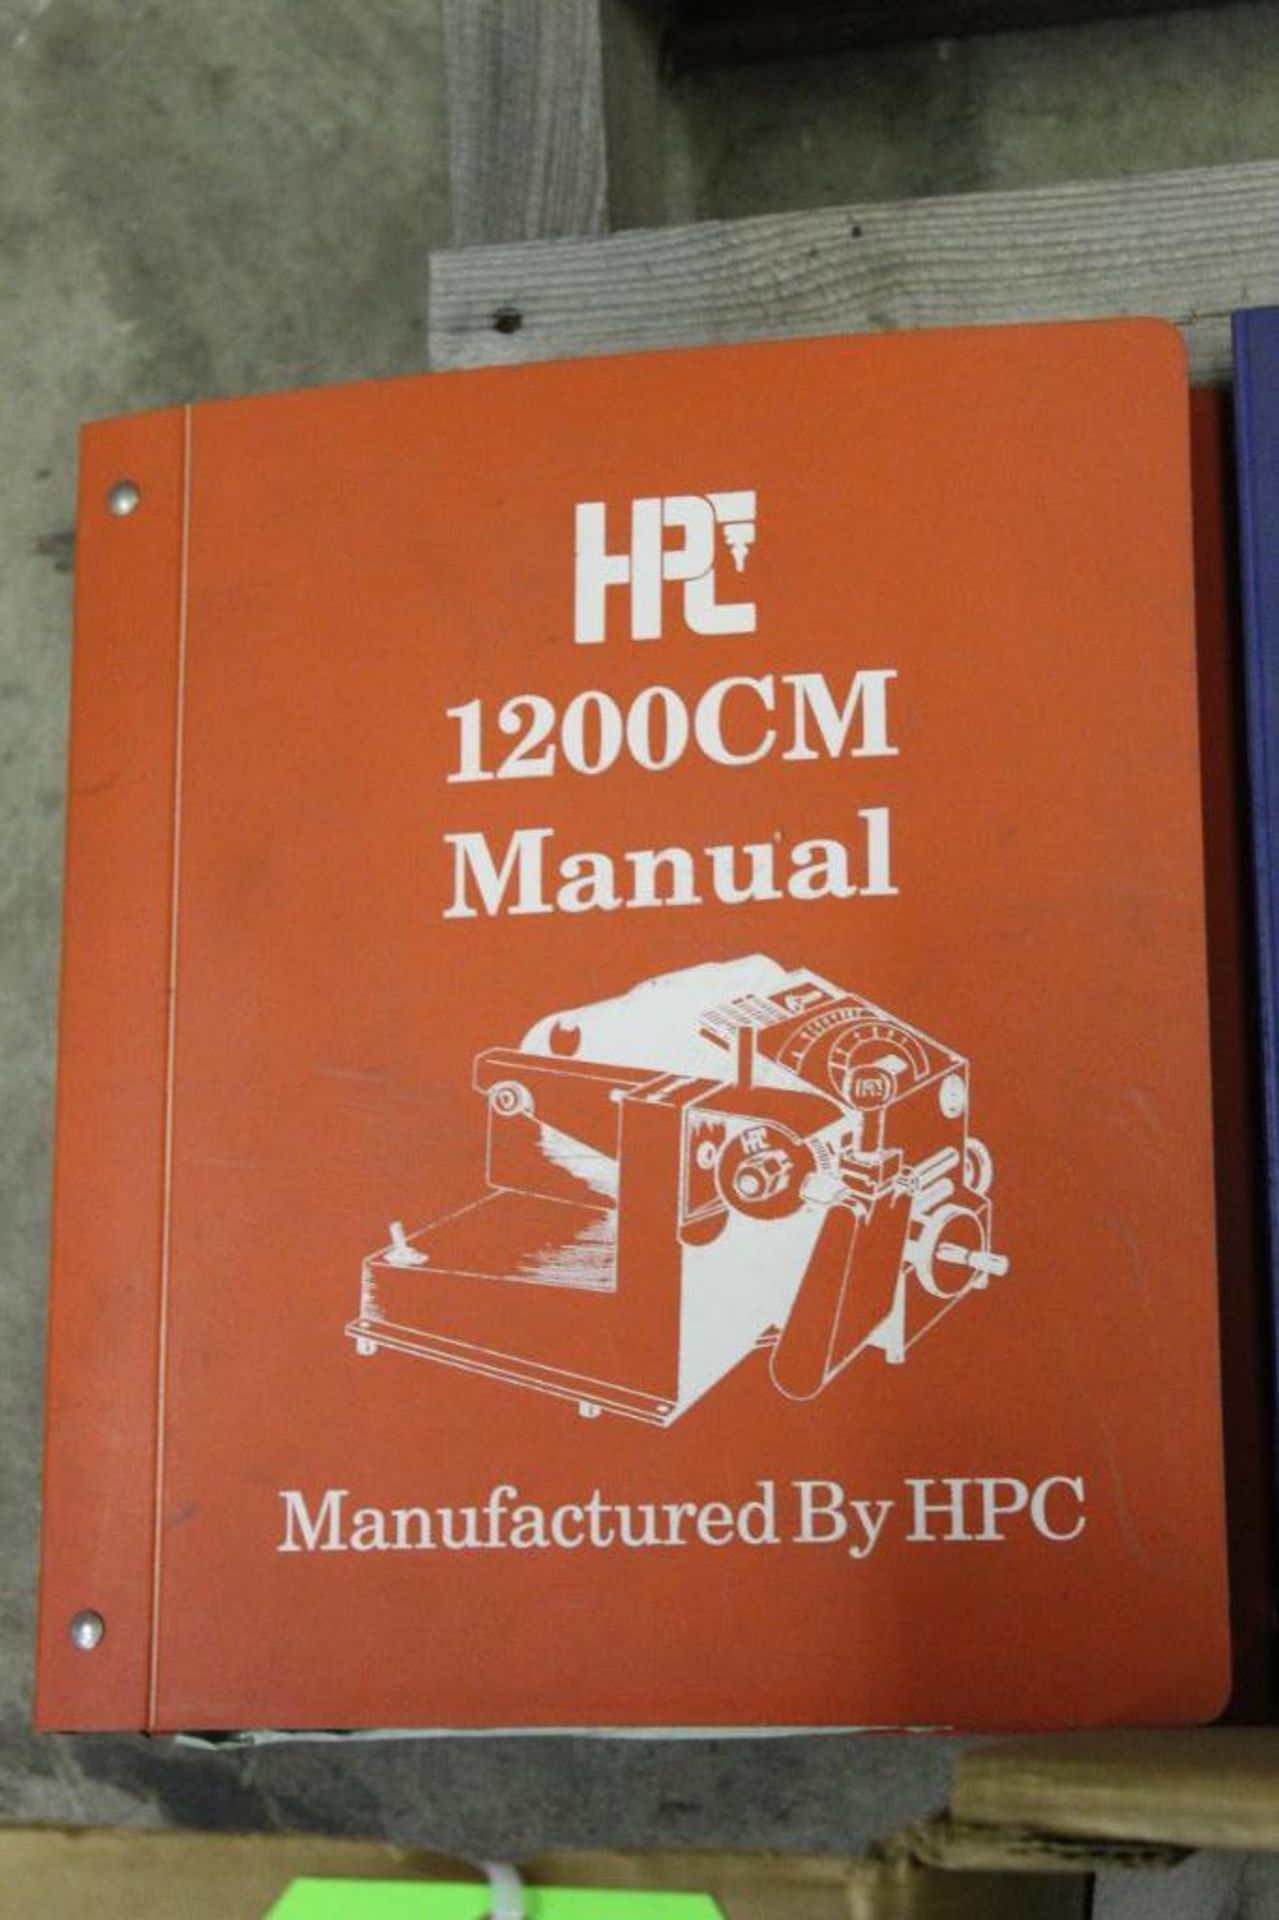 HPC 1200CM Key Cutting Machine with Manuals - Image 7 of 7